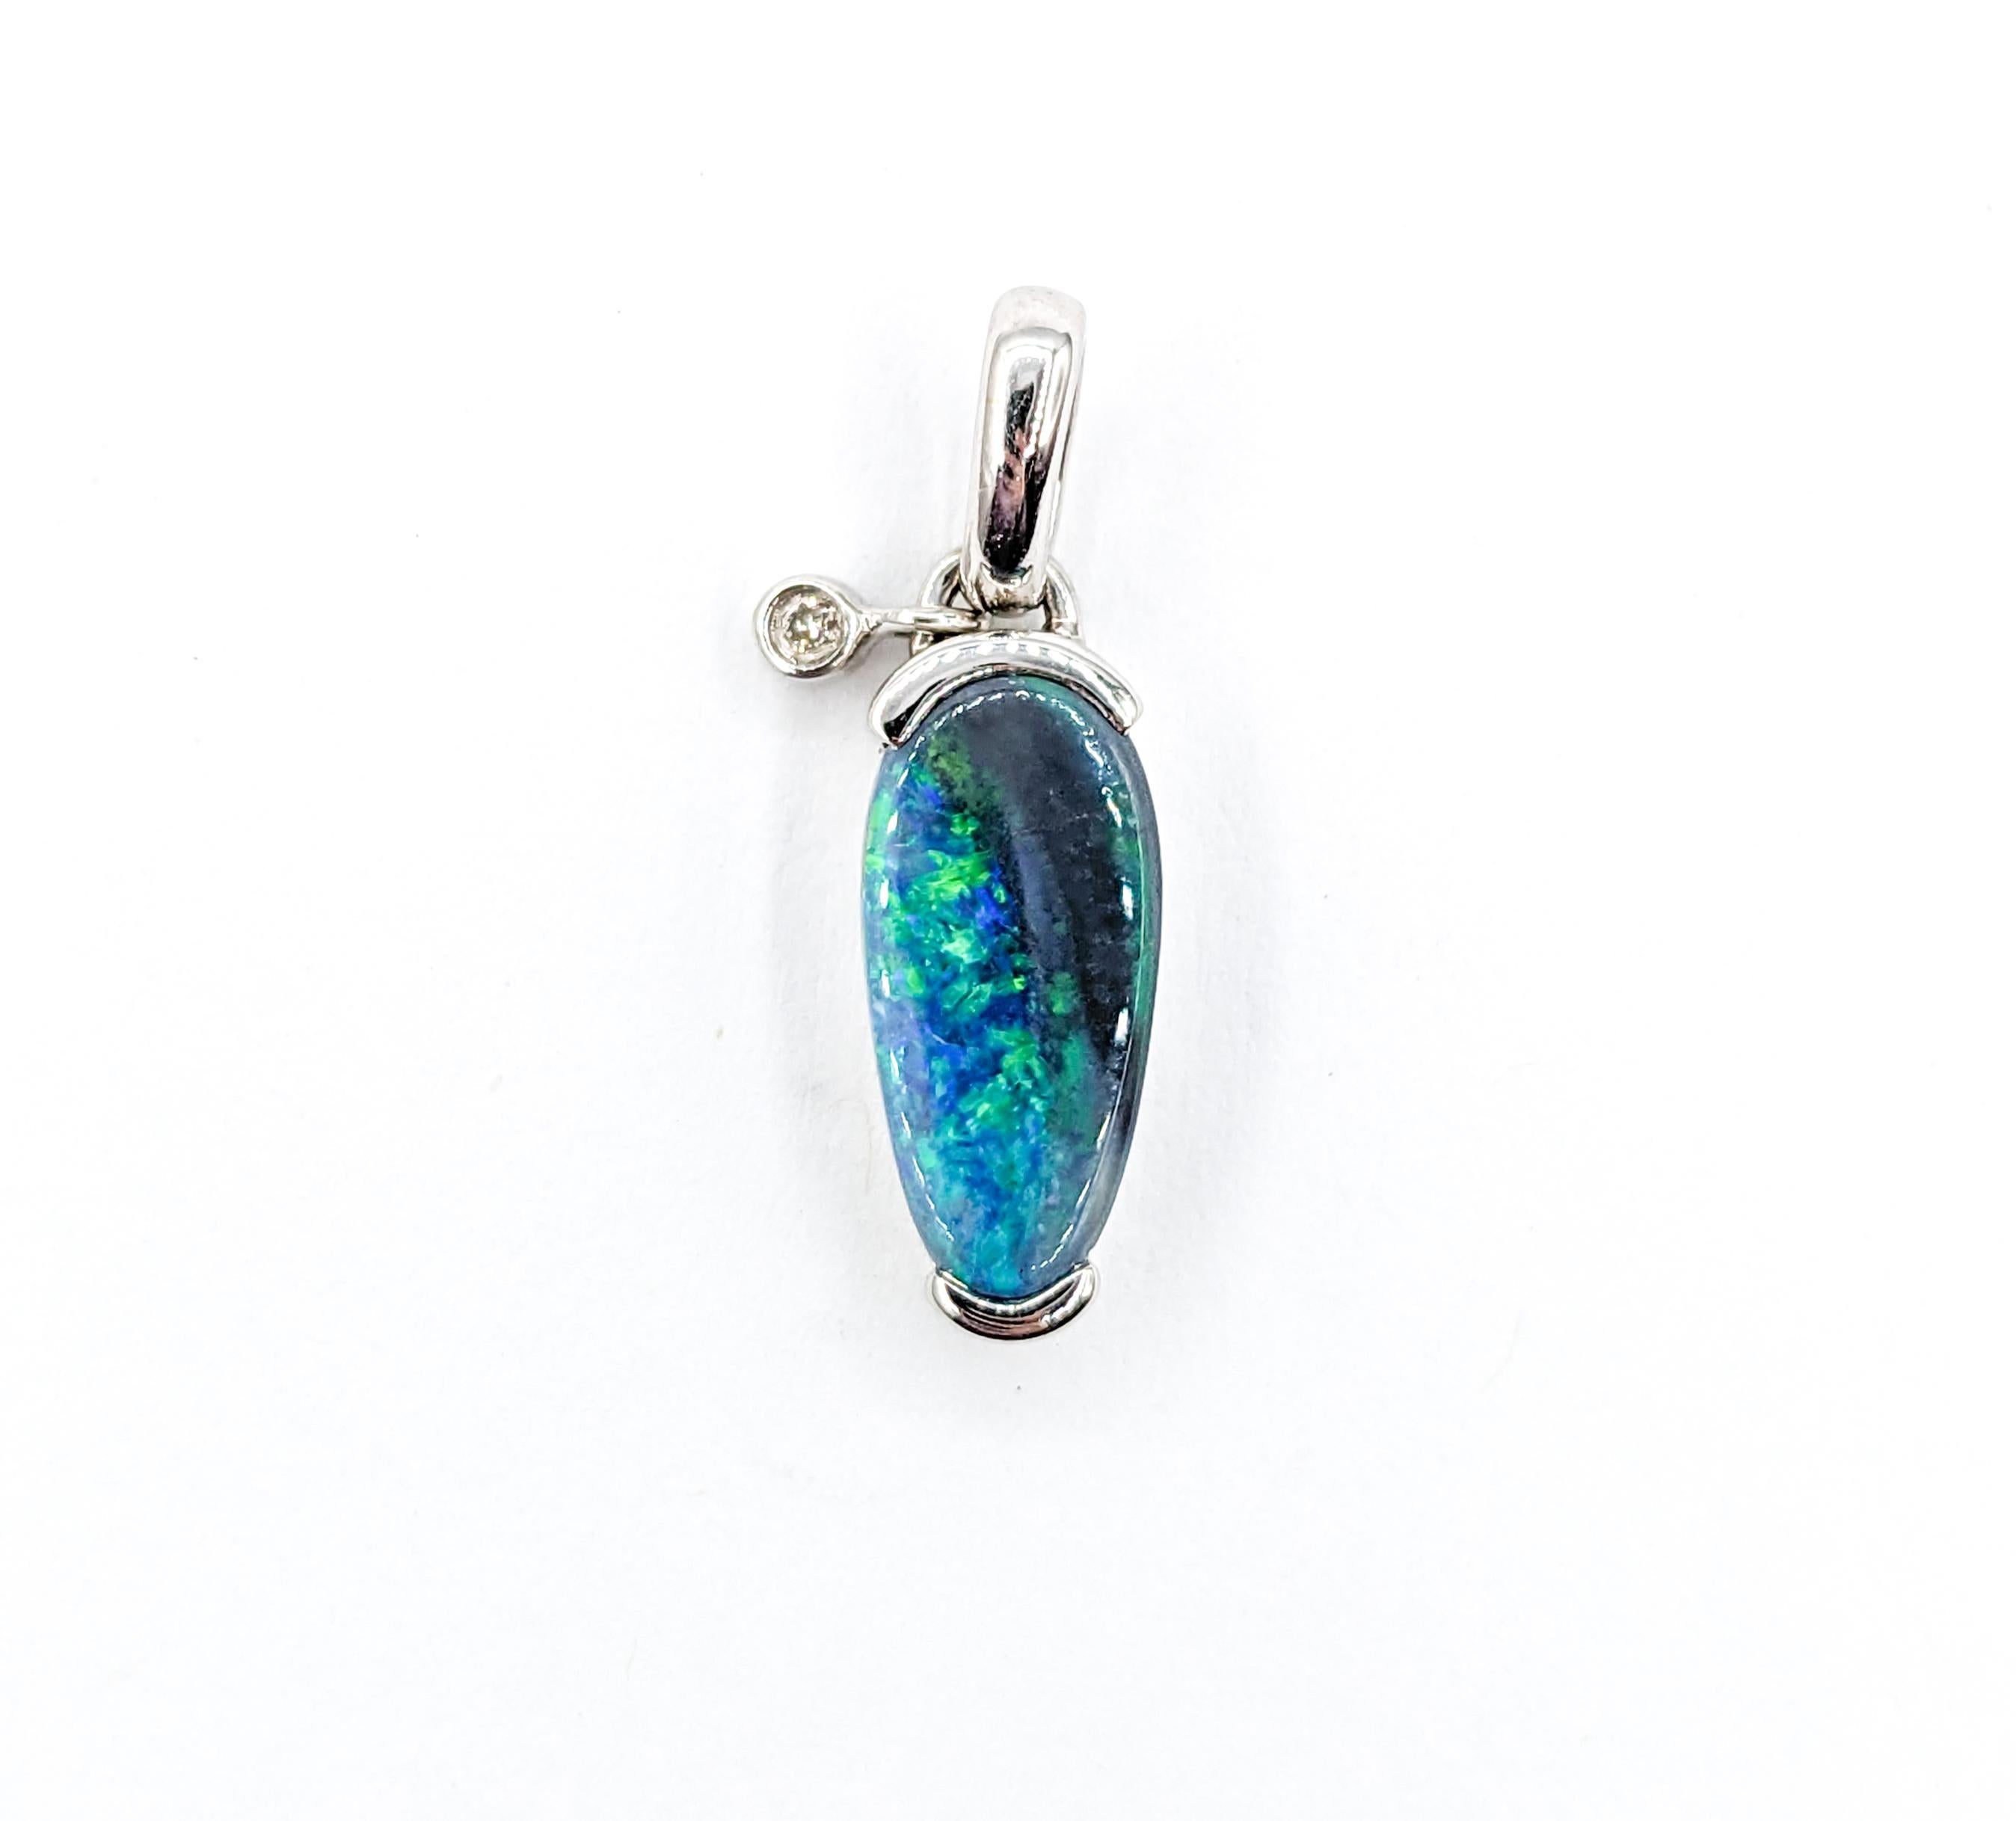 1.50ct Black Opal Pendant in White Gold

This pendant is an exquisite piece of jewelry crafted in 14kt white gold, featuring a sparkling 0.02ct diamond of I clarity and a near colorless white hue. At the heart of the pendant is a magnificent 1.50ct